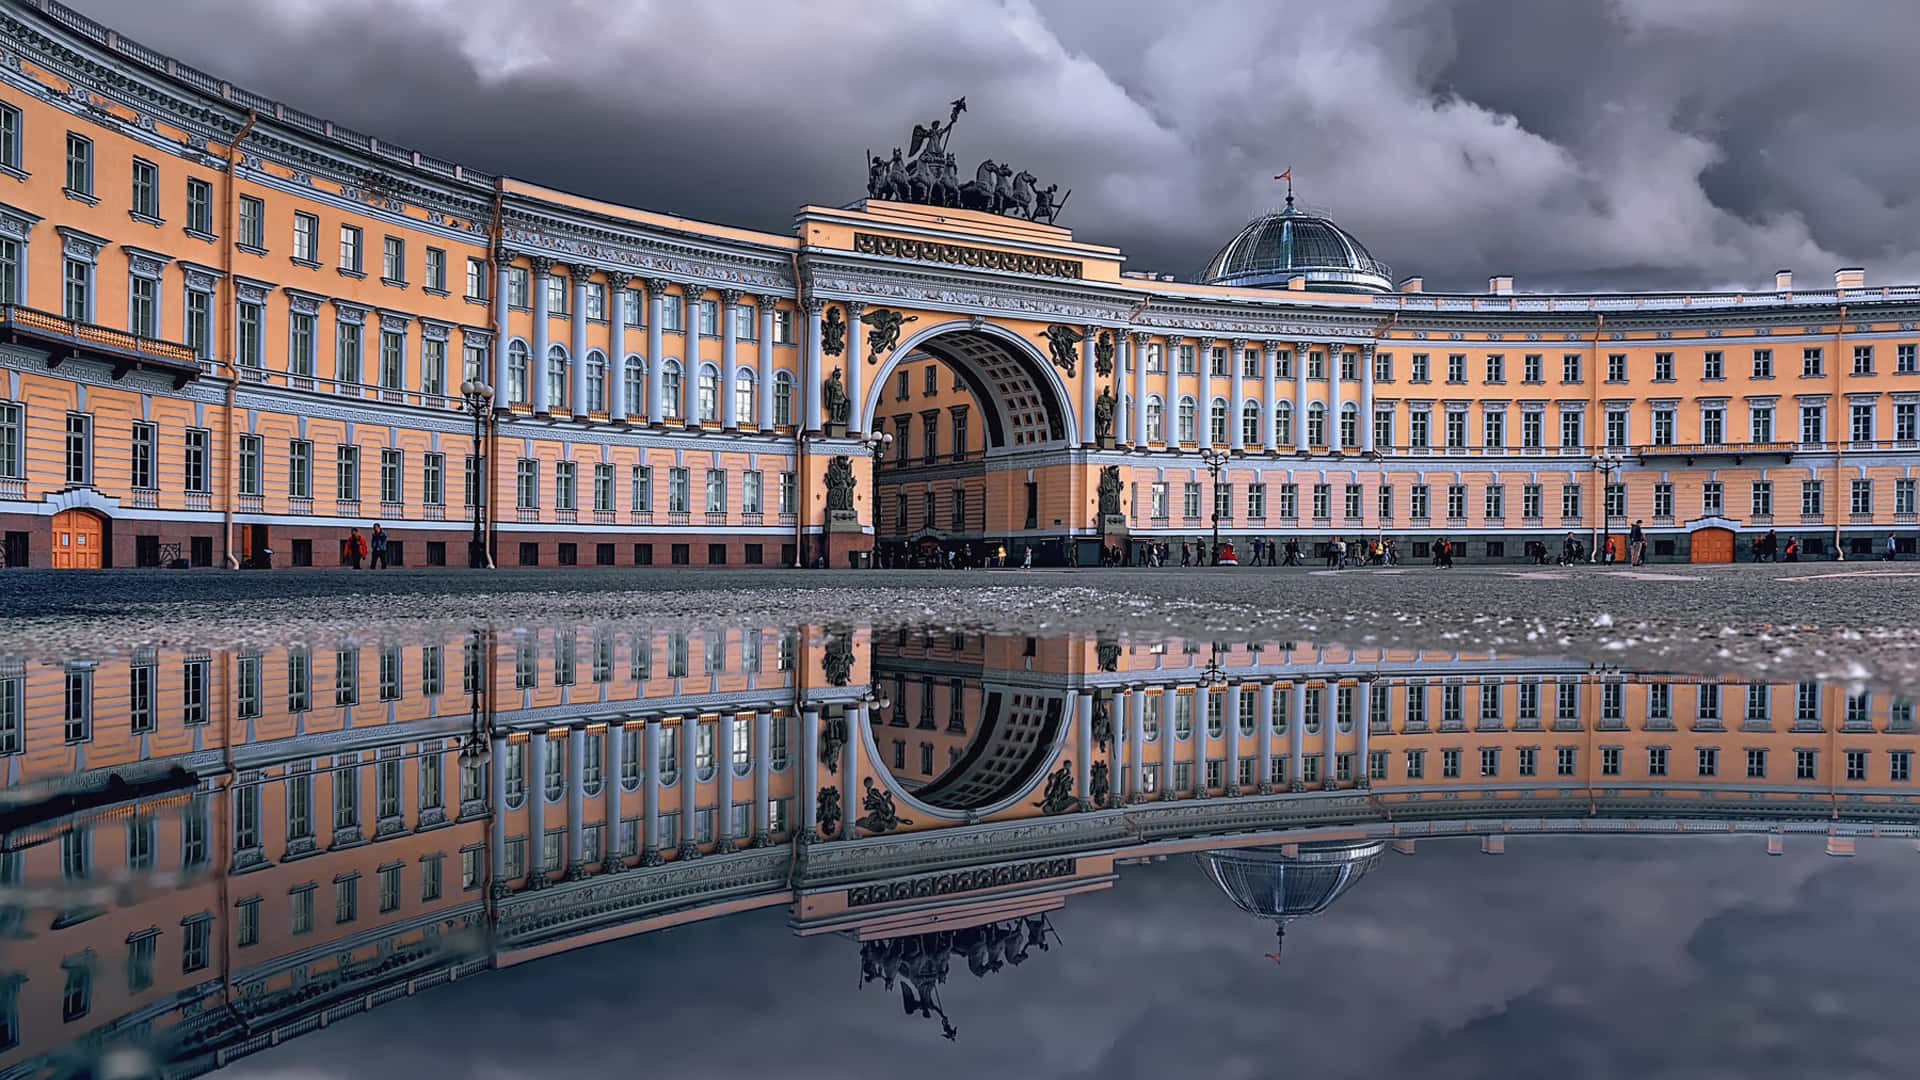 The Hermitage Mirror Reflection Wallpaper